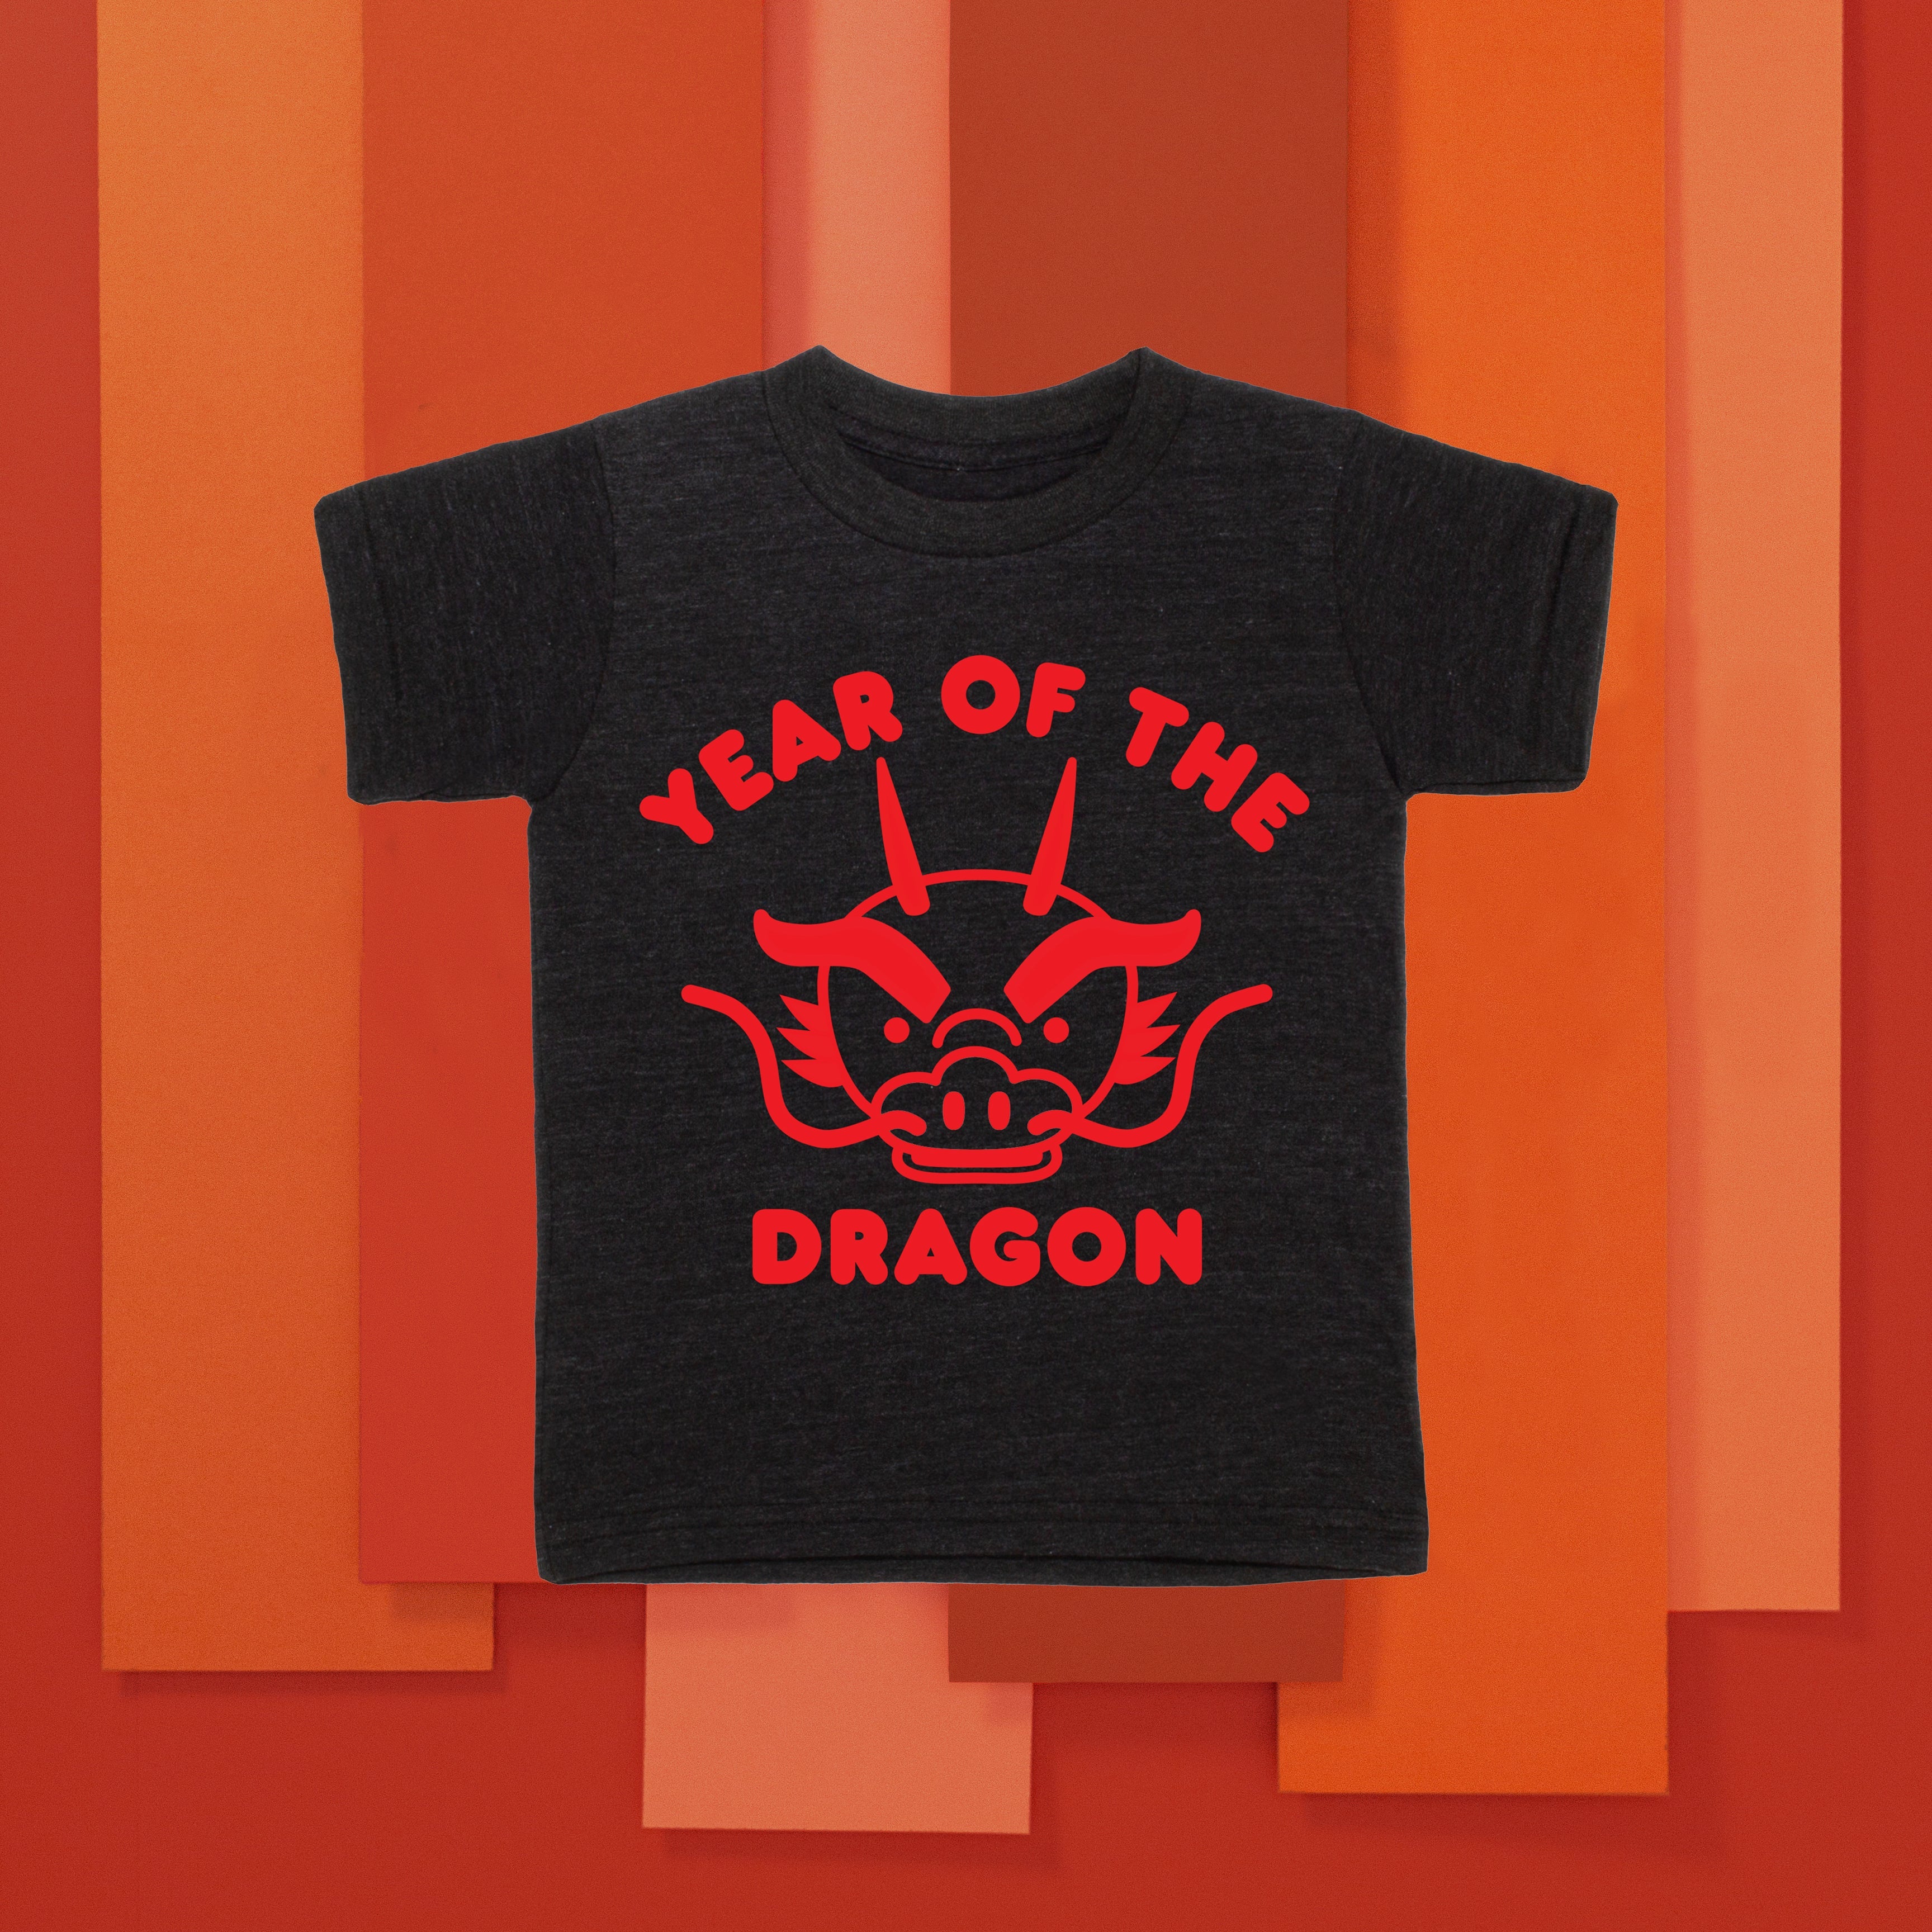 Year of the Dragon Baby + Kid + Adult Tee